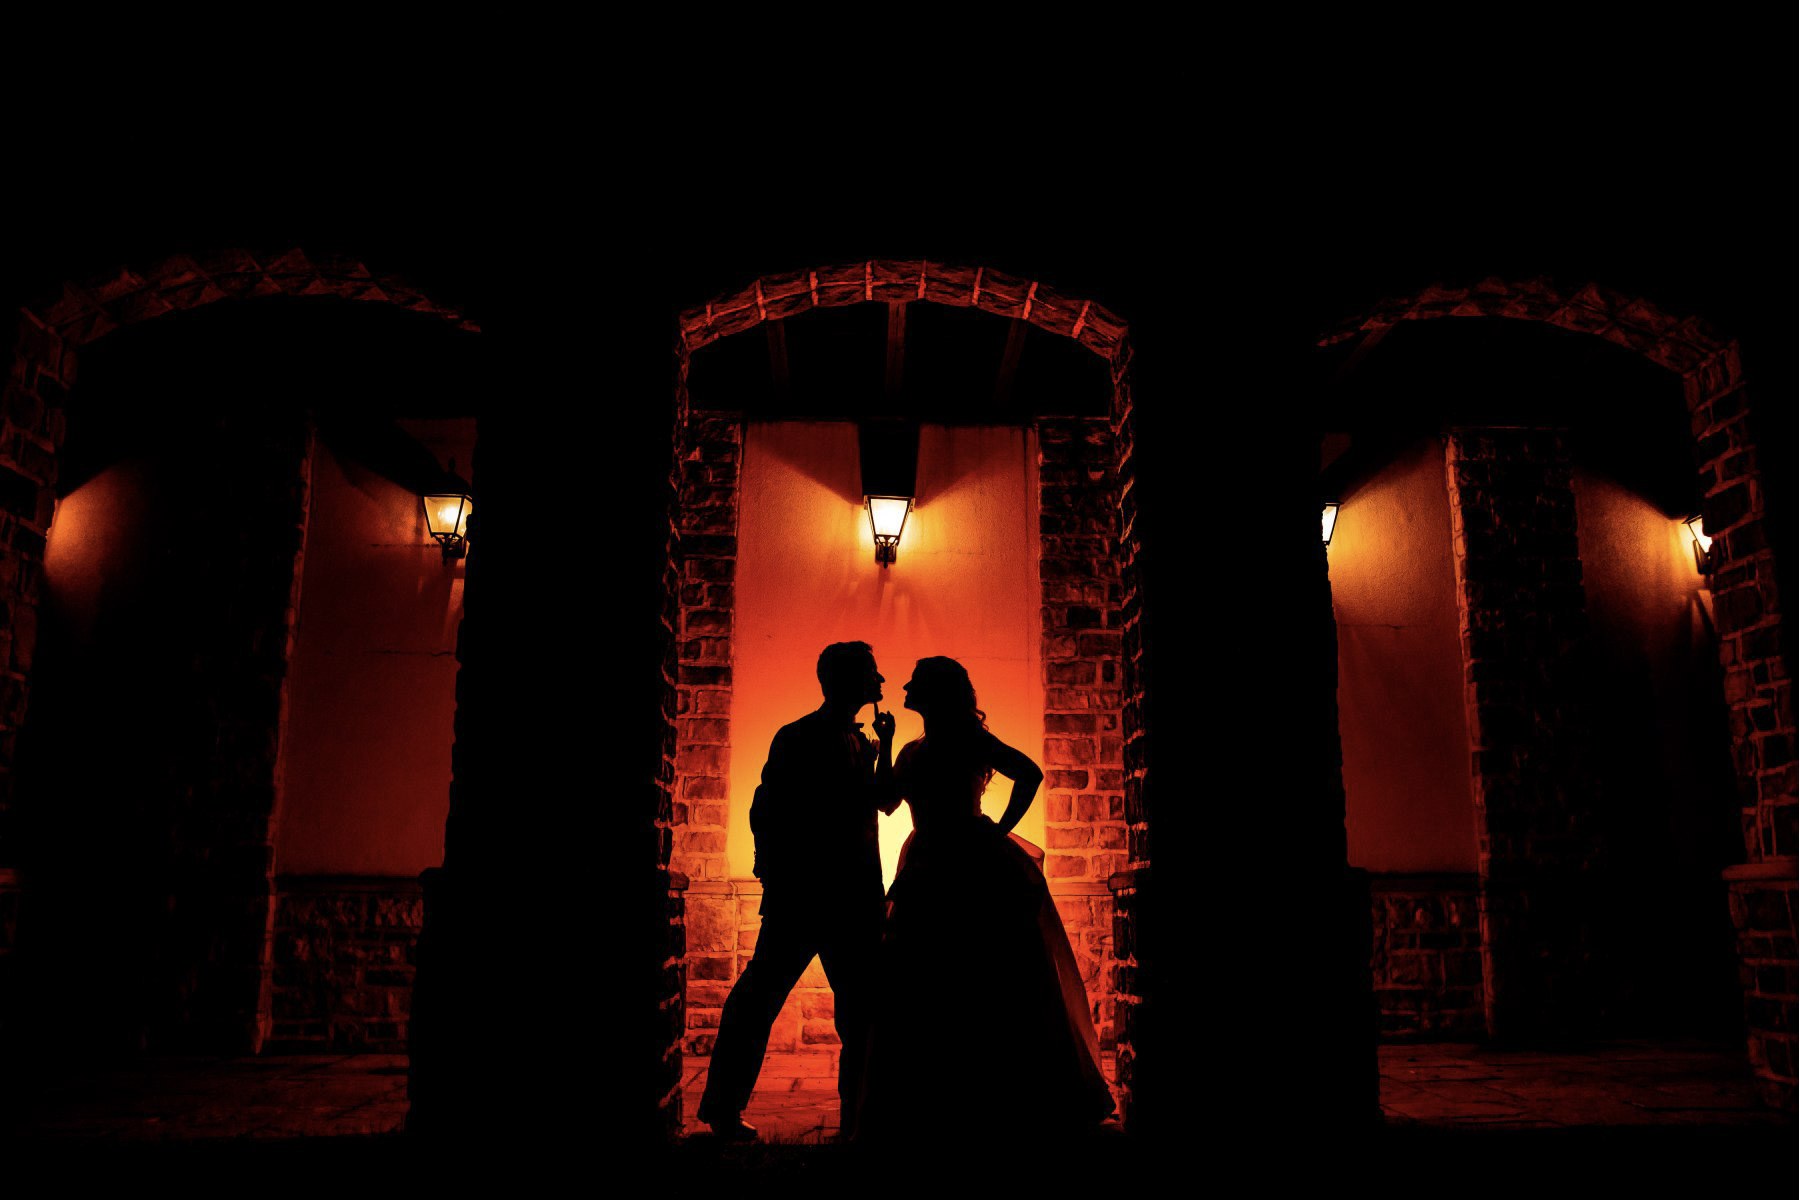 a silhouette of a couple with warm background lighting